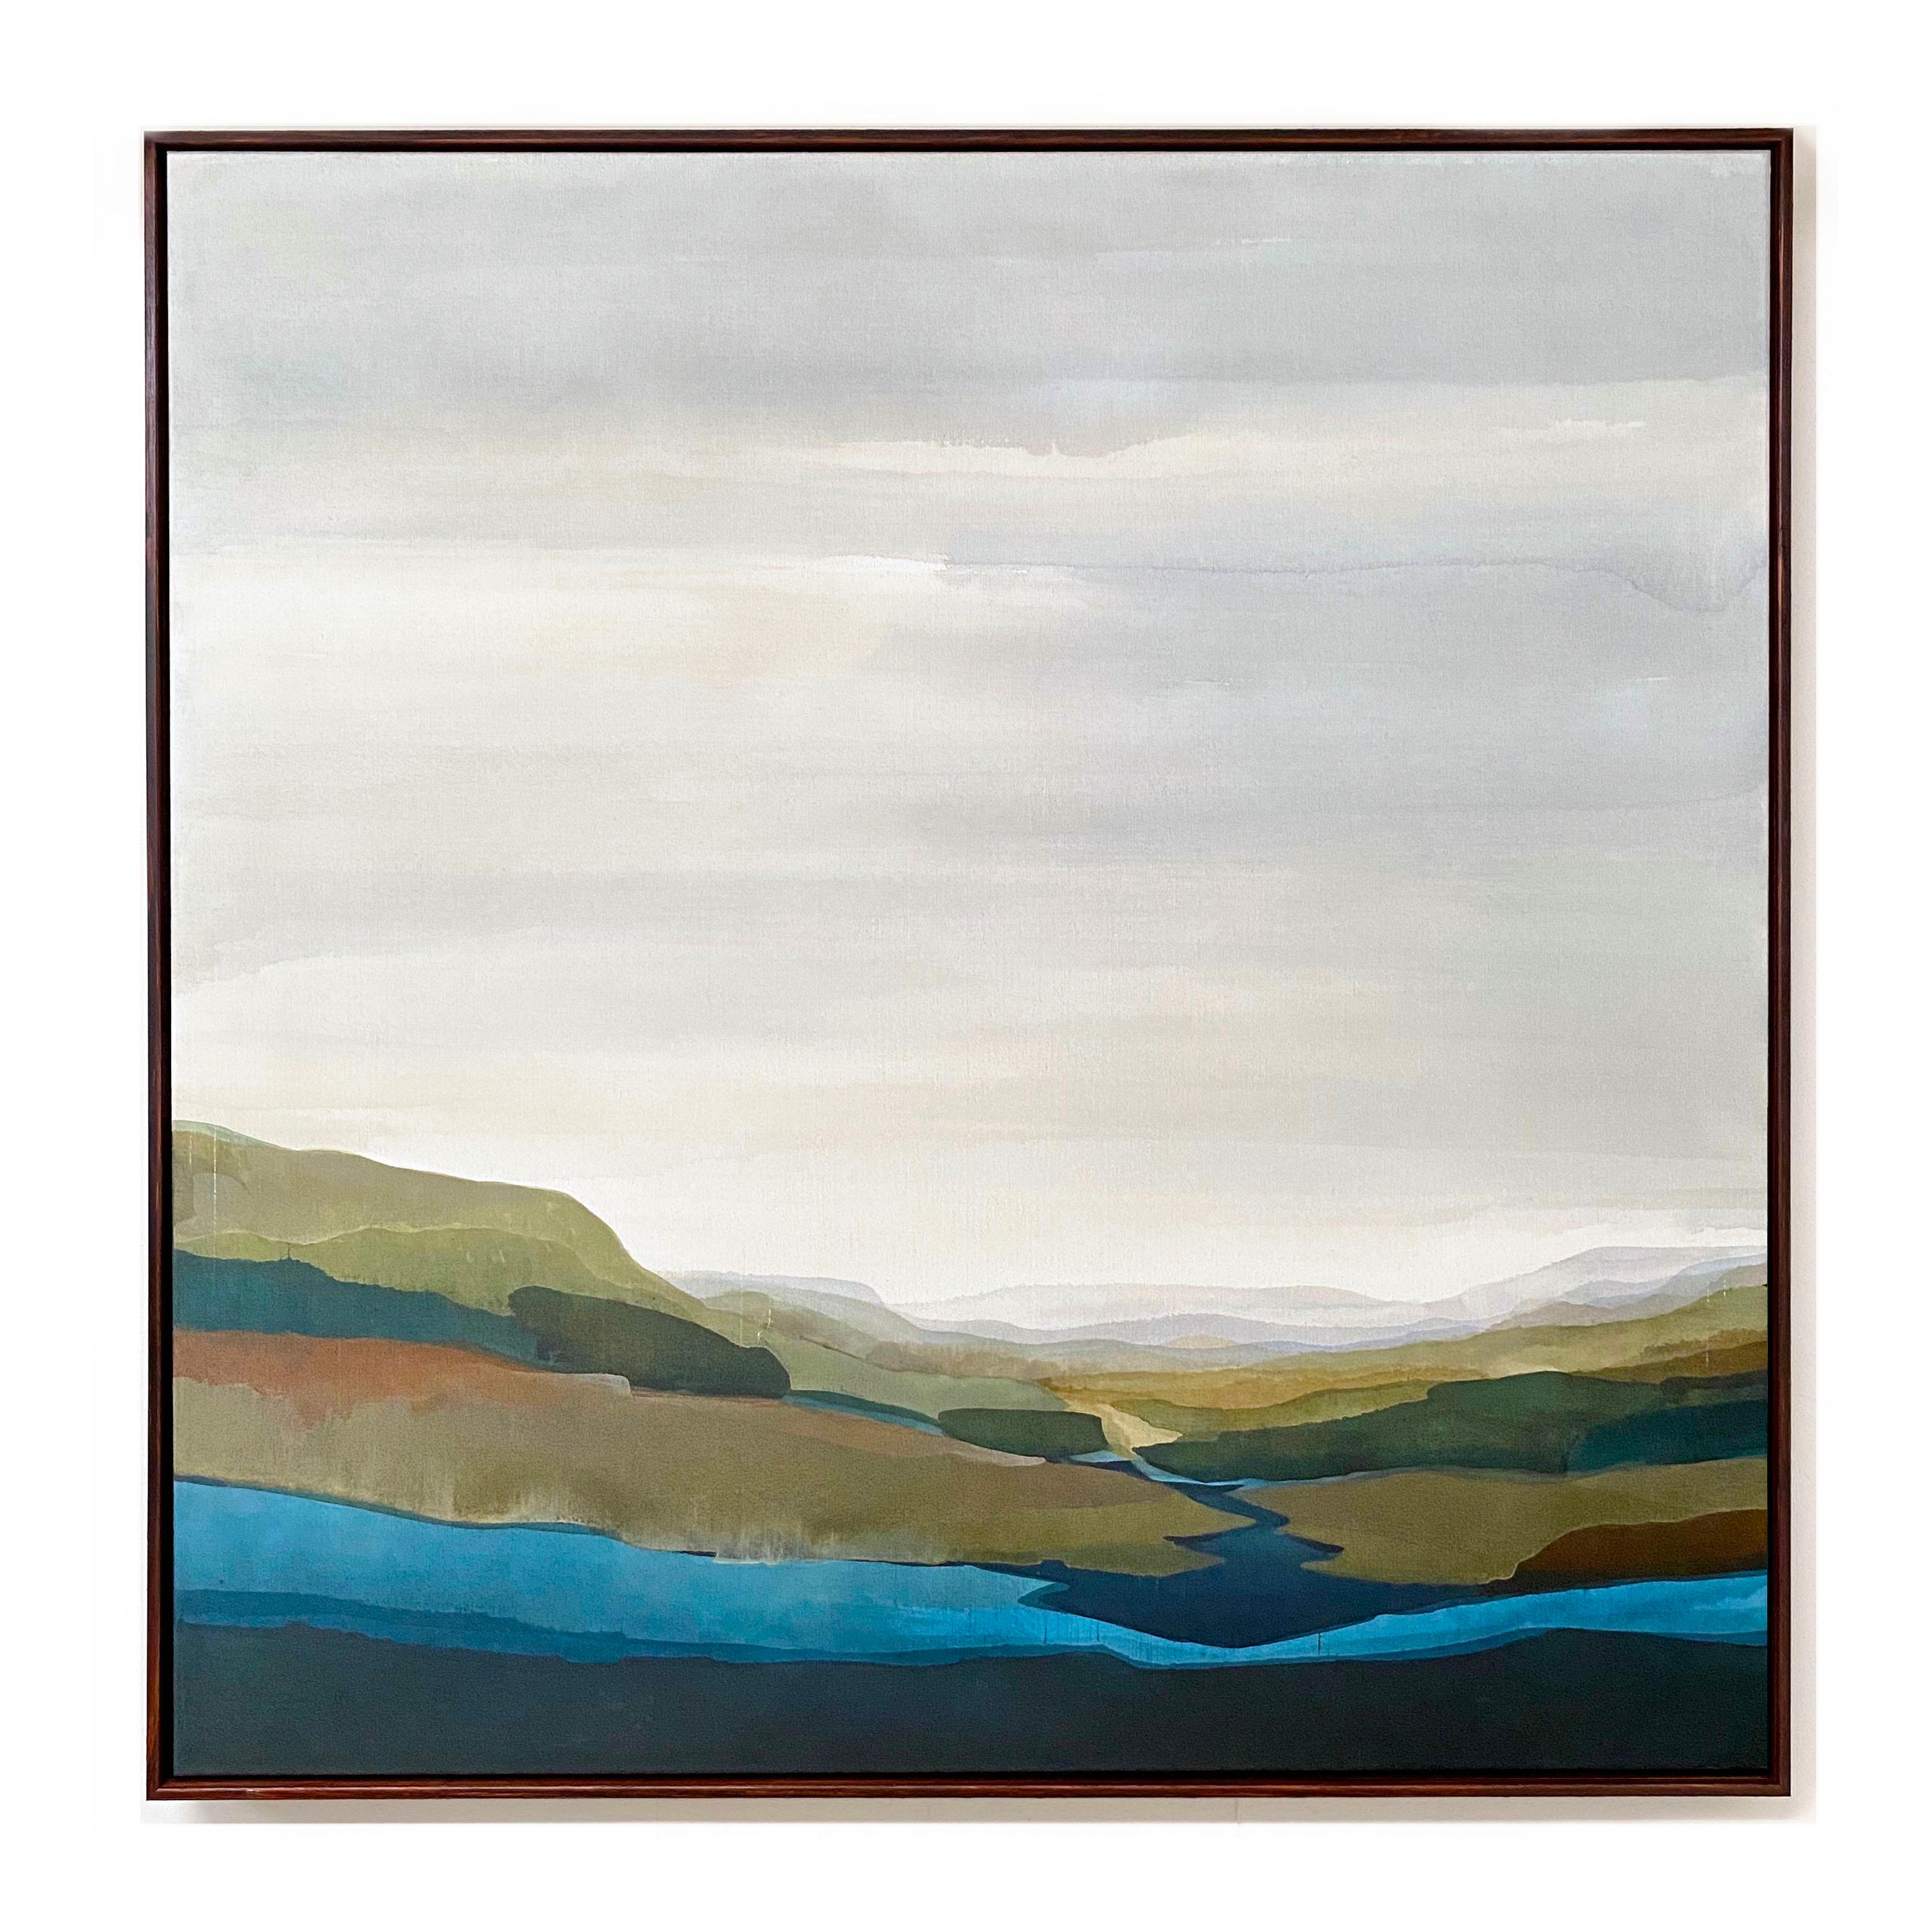 Original artwork by Stefan Gevers, acrylic on canvas, 104cm x 104cm, framed in walnut-stained oak.

The iconic character of rural areas contributes to outlining the personality of the landscapes and the symbolic characteristics of these places.